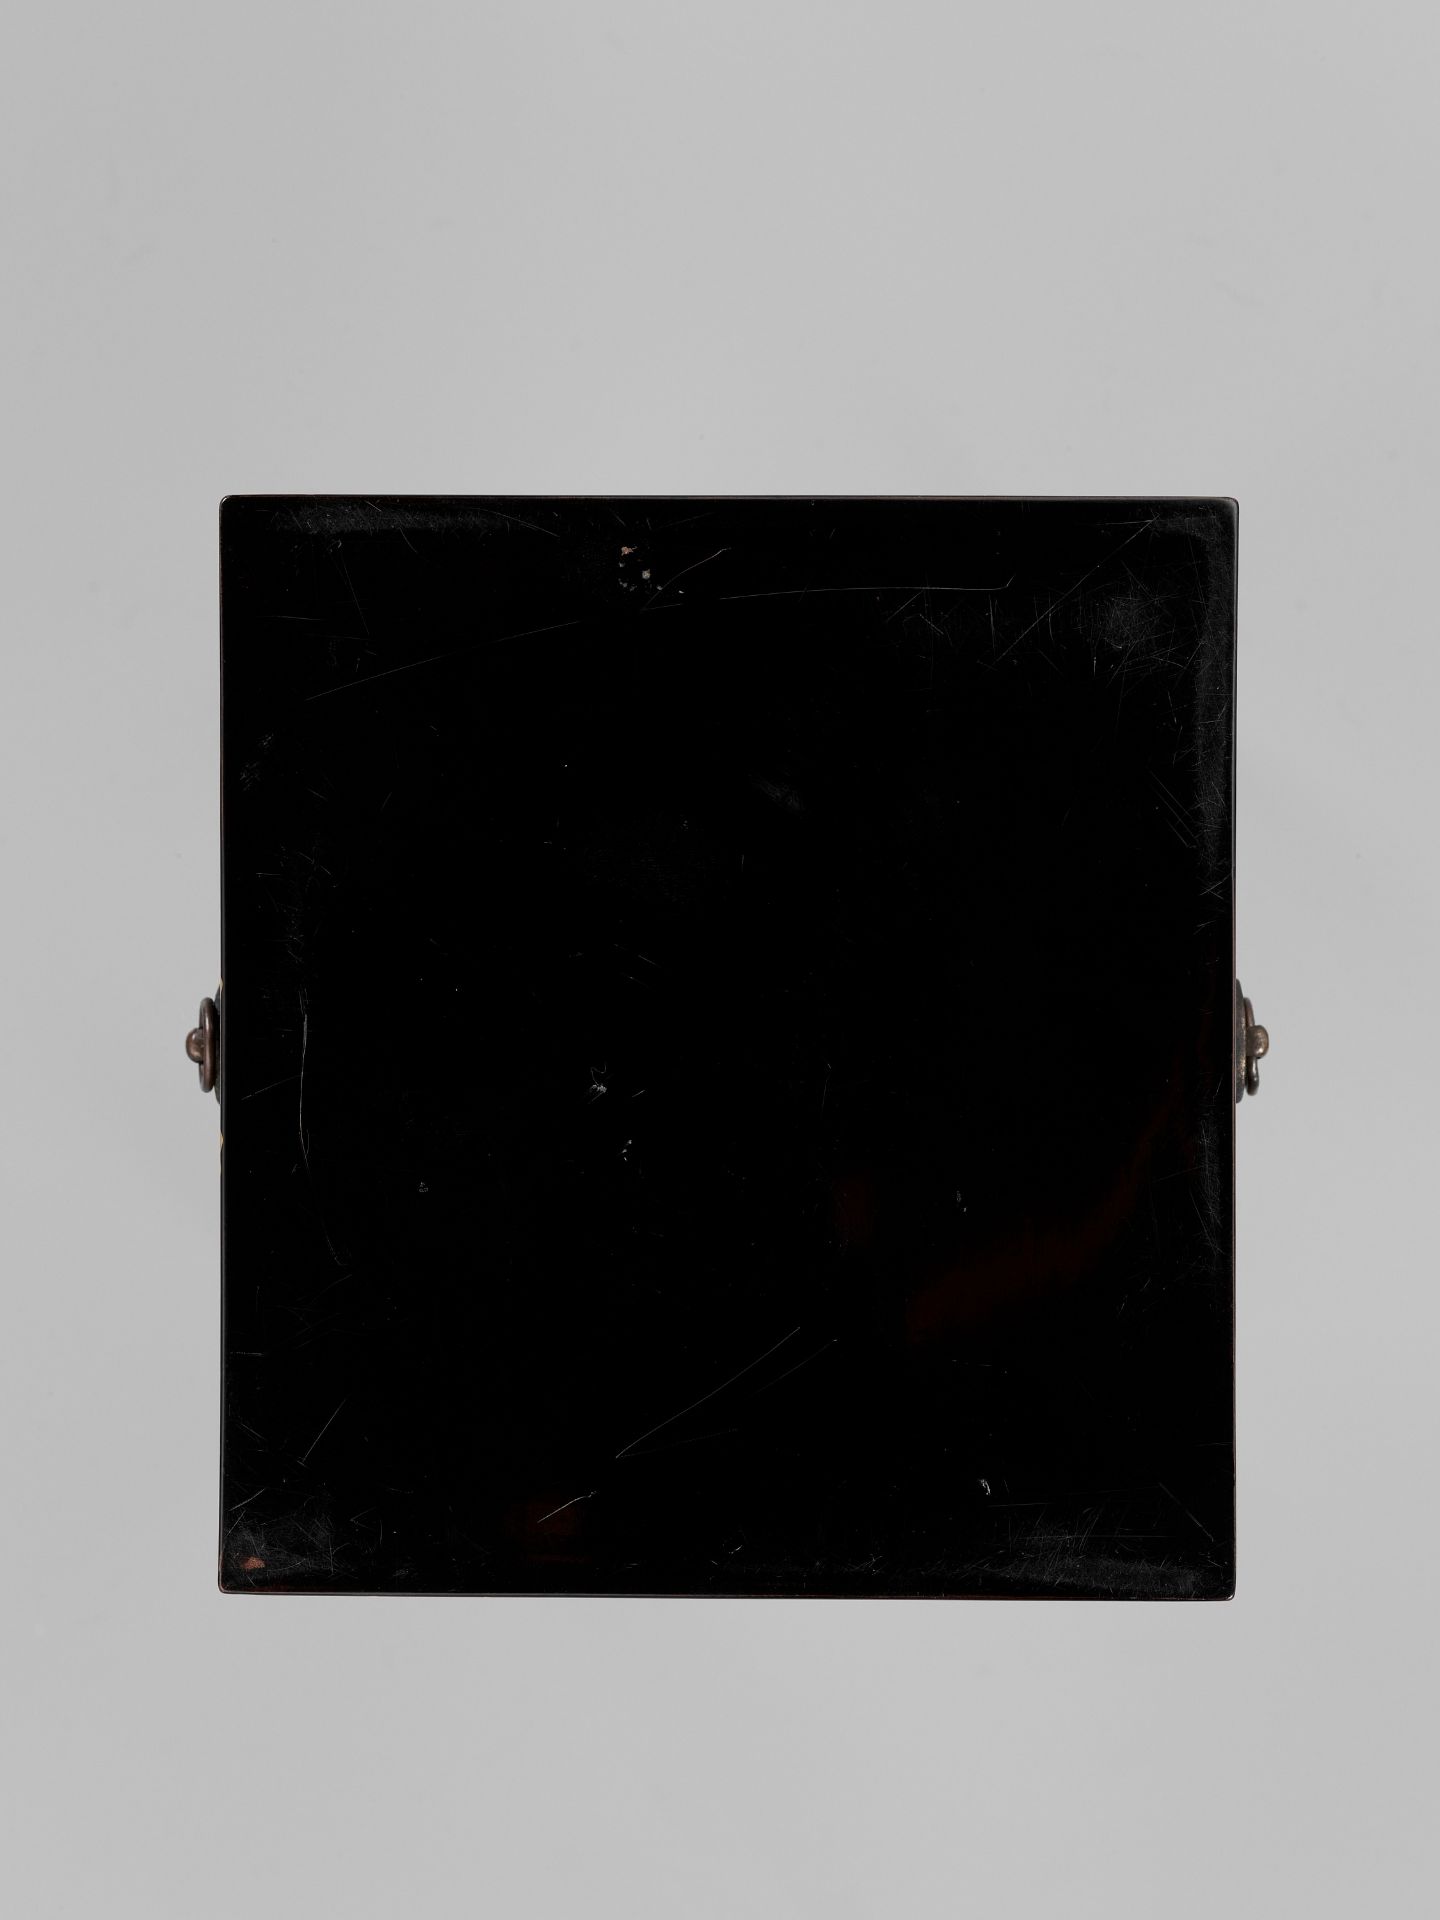 A LACQUER BOX AND COVER WITH MONS - Image 9 of 9